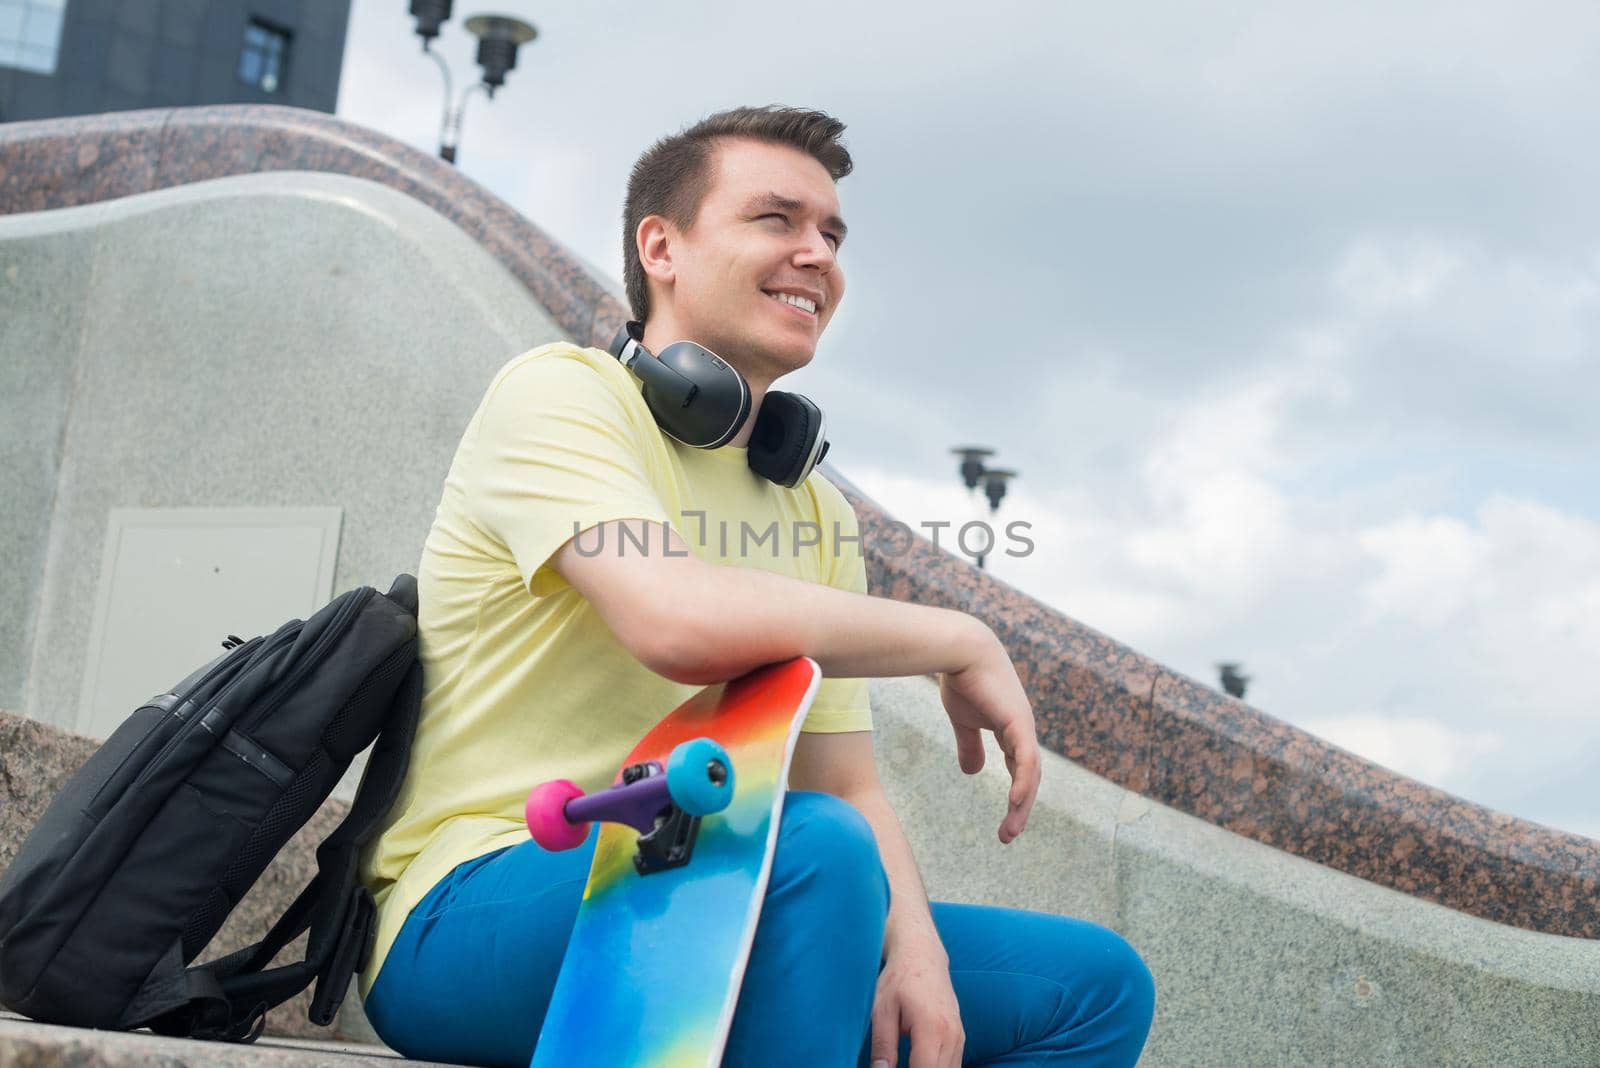 Urban young man with skateboard sitting on stair steps